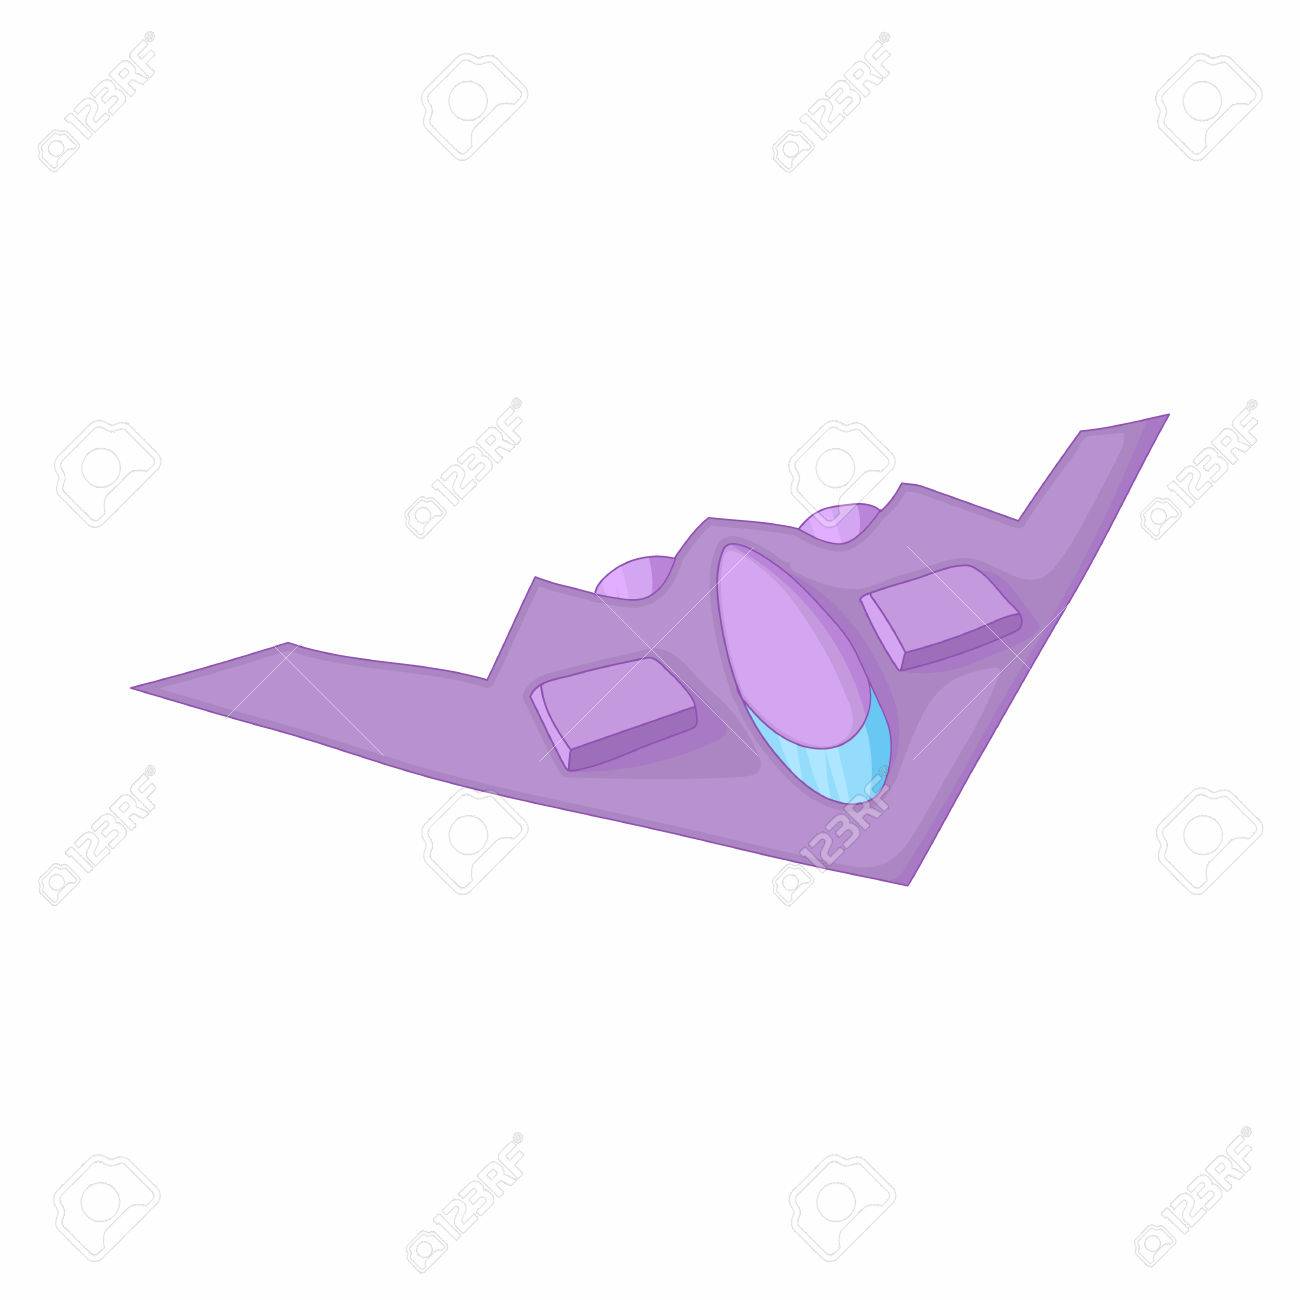 Stealth Bomber Icon In Cartoon Style On A White Background Royalty